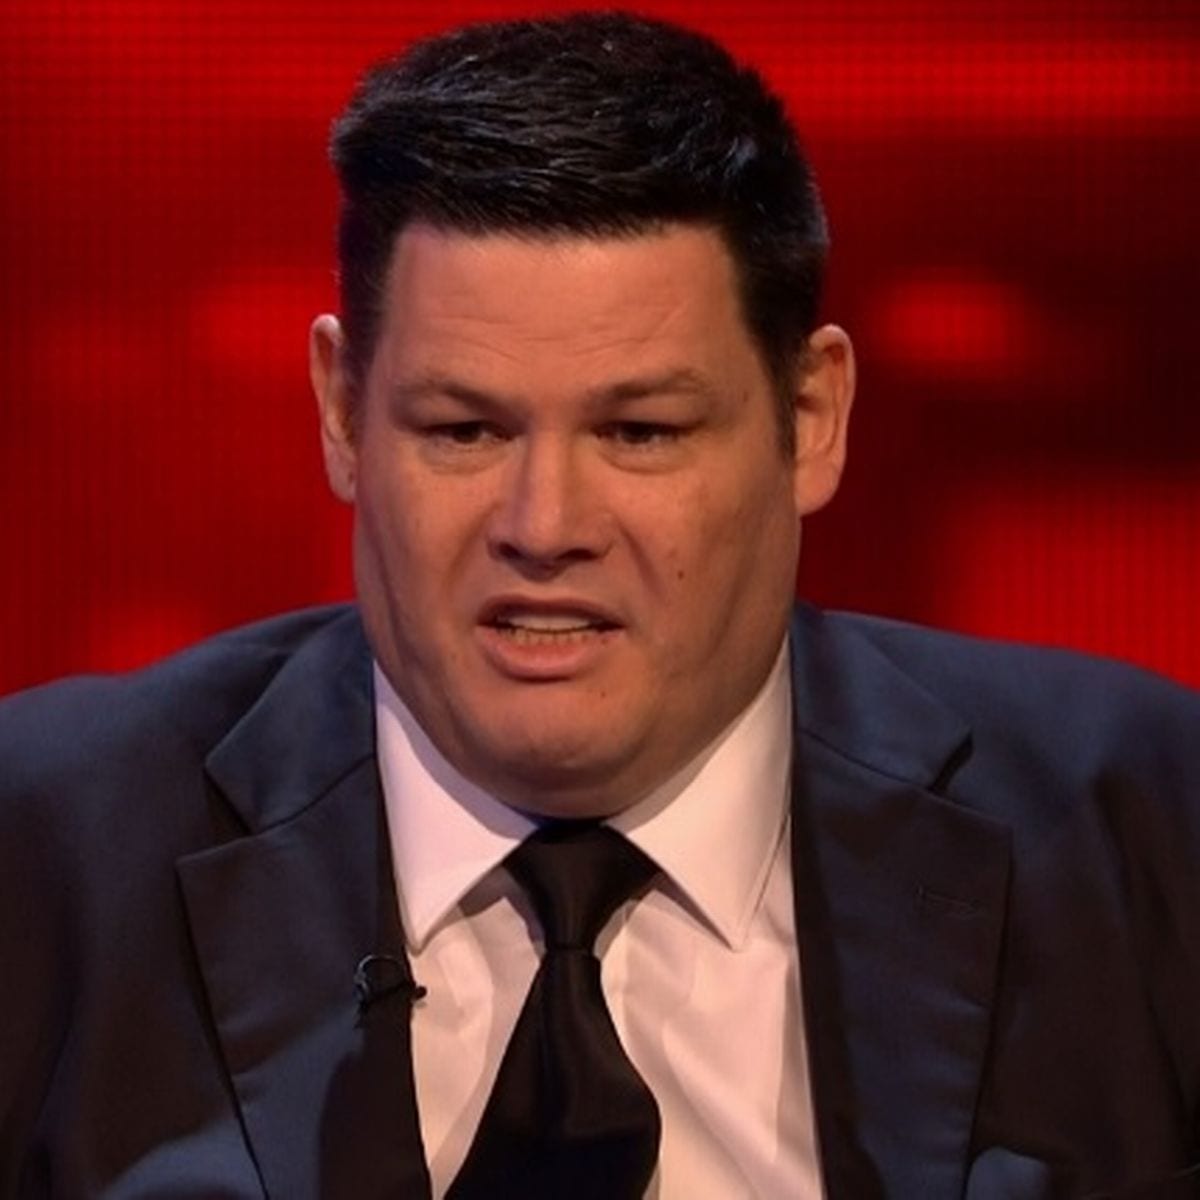 What is Mark Labbett Net Worth in 2021, How Rich is The Beast?